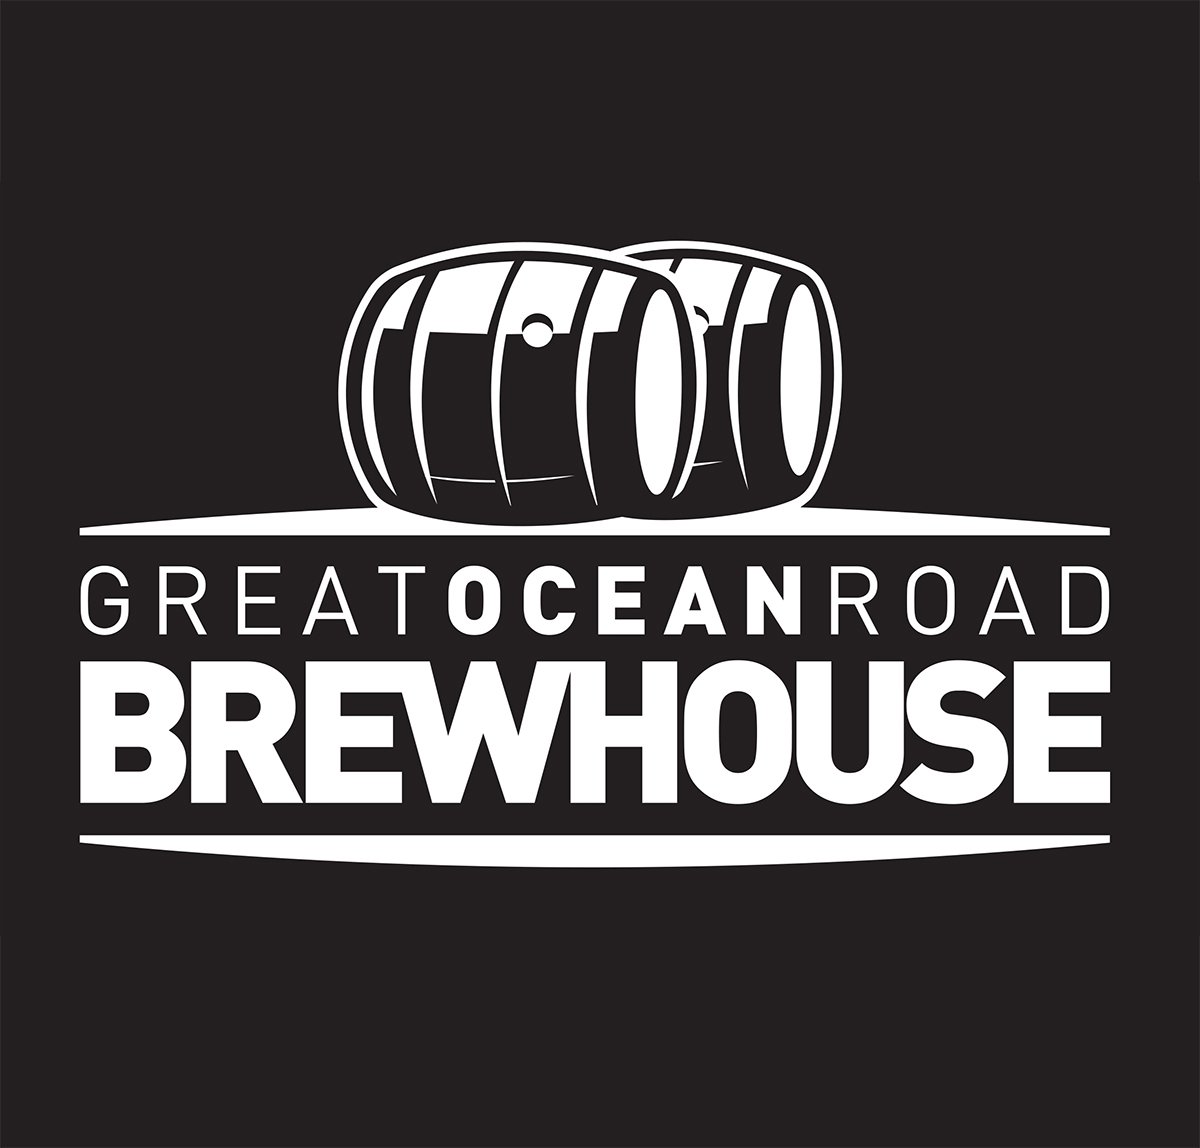 The Great Ocean Road Brewhouse